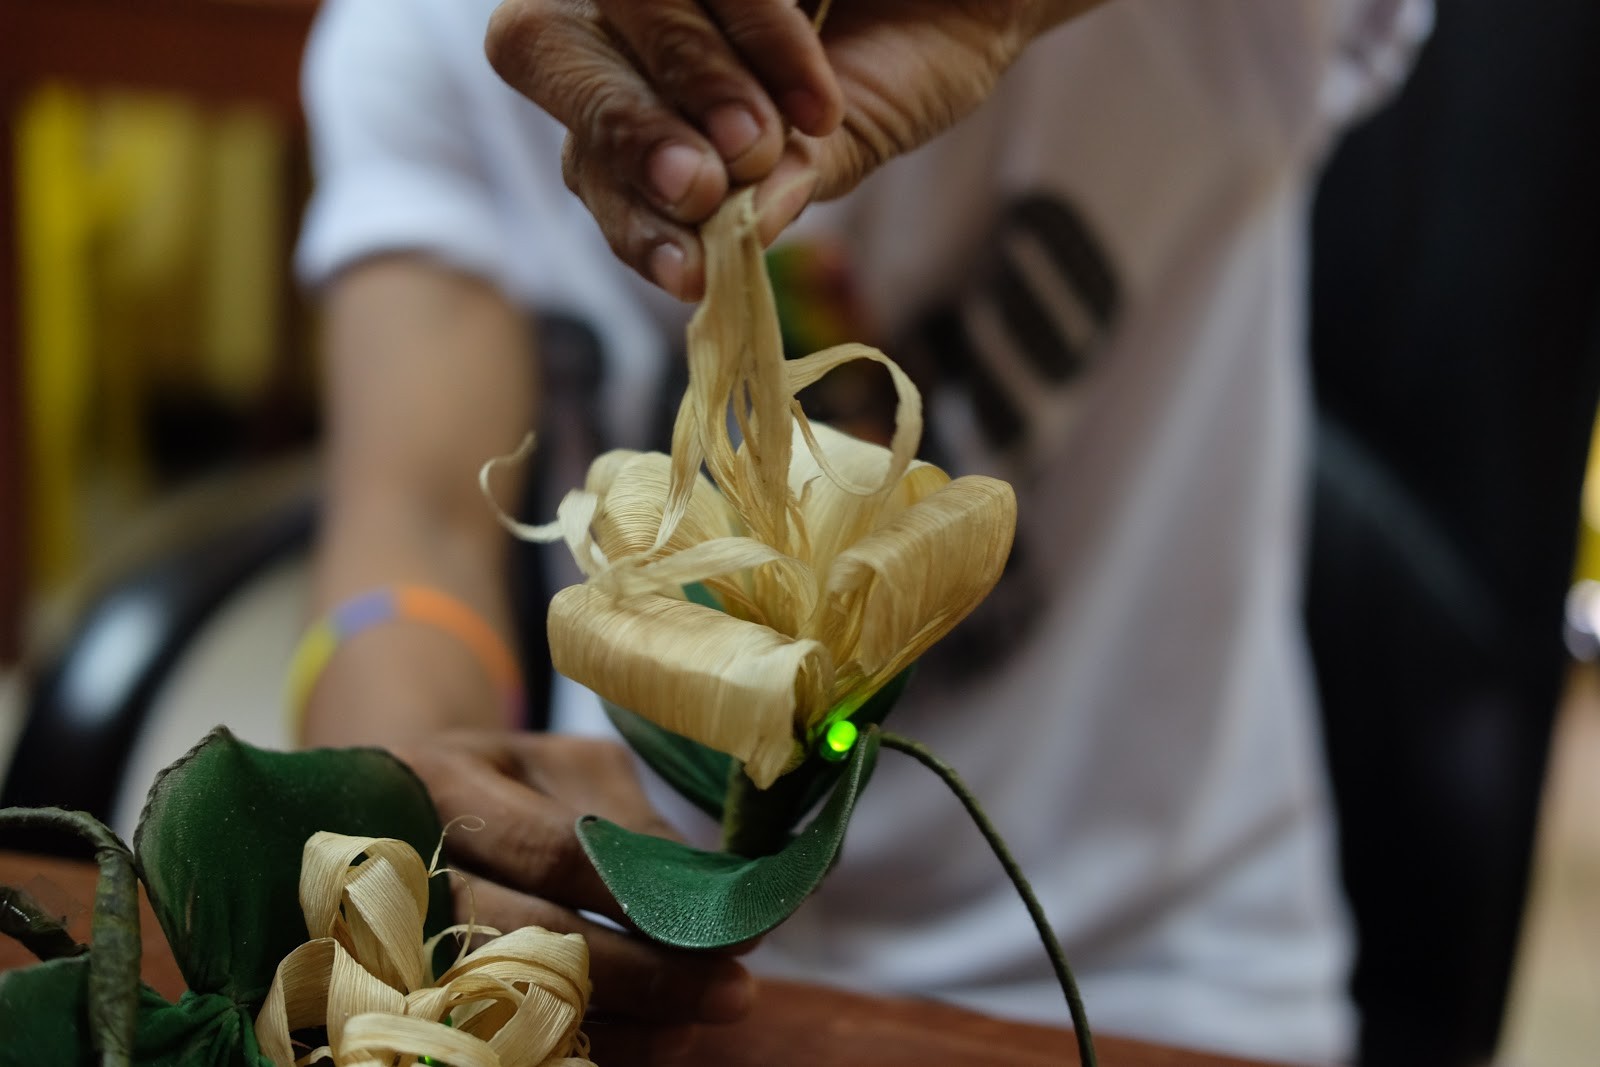 Peter and his fellow delegates from Culiat make this centerpiece from scratch using corn husk. The product won Best Business Plan at the Street Law Conference held in May 2015.